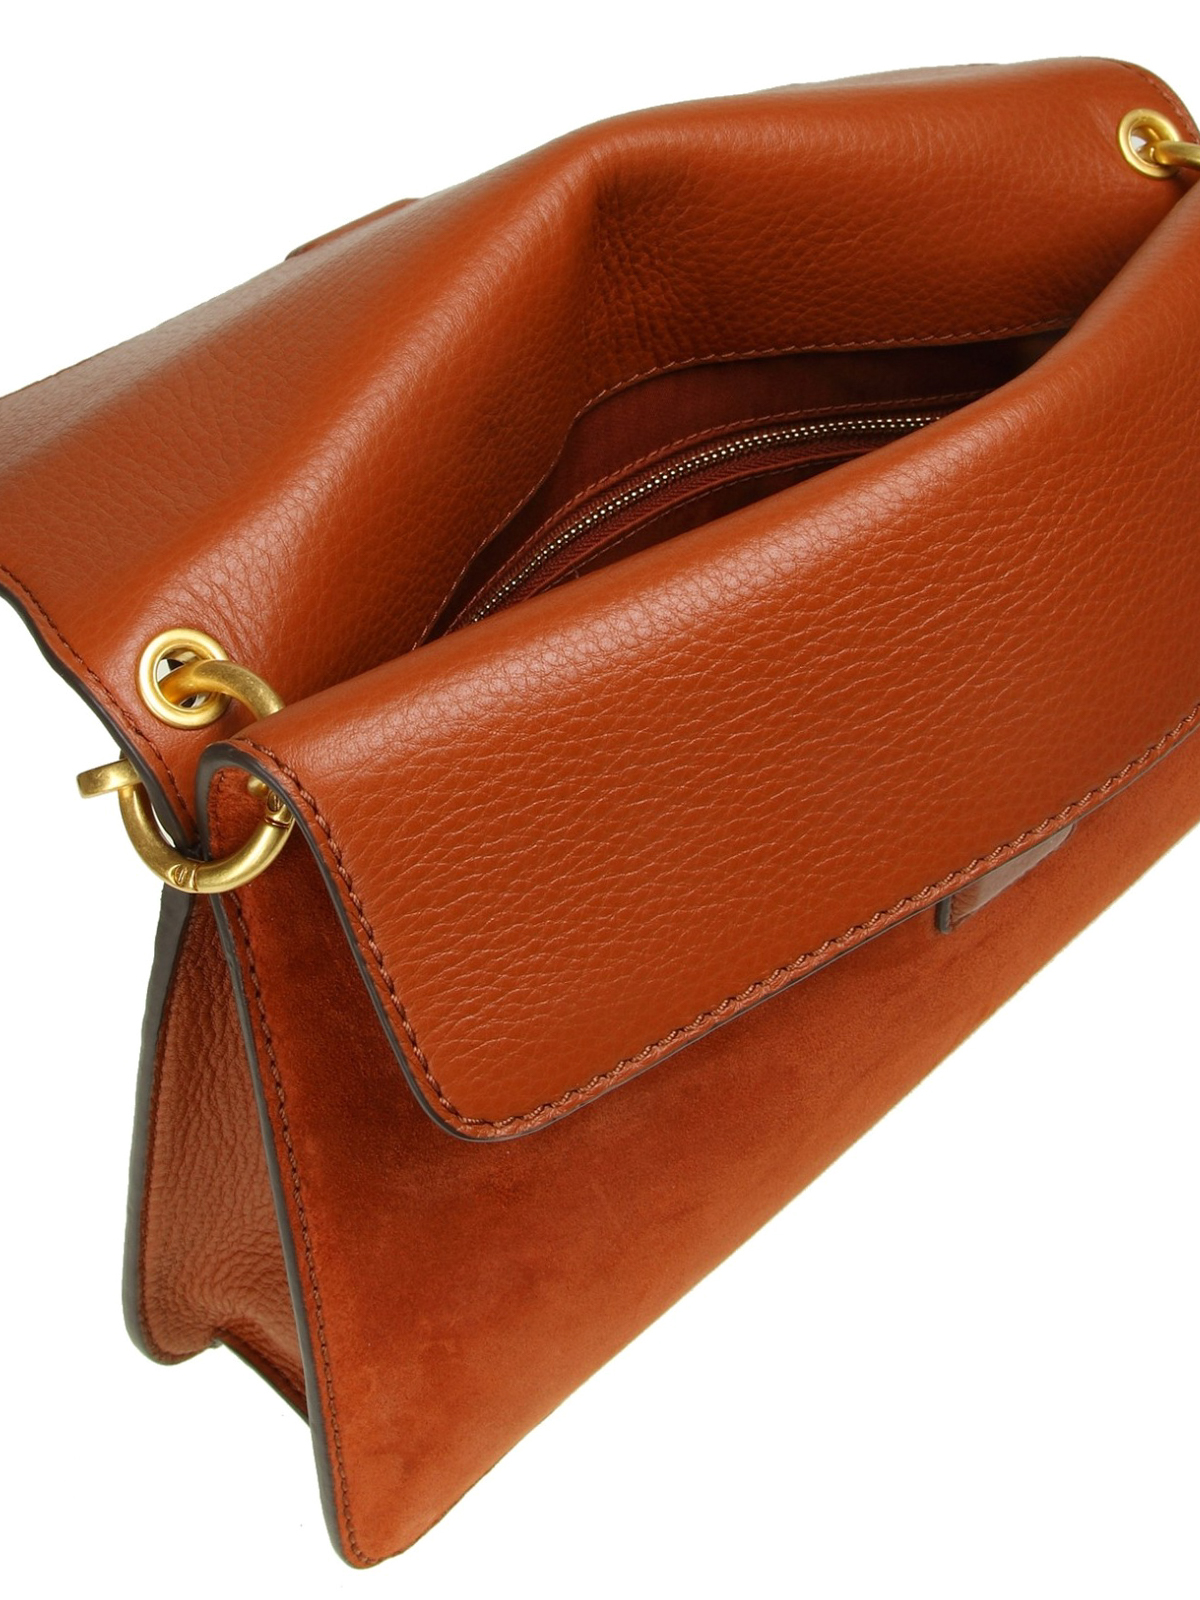 McGraw Leather Handbag: Wallets & Leather Totes